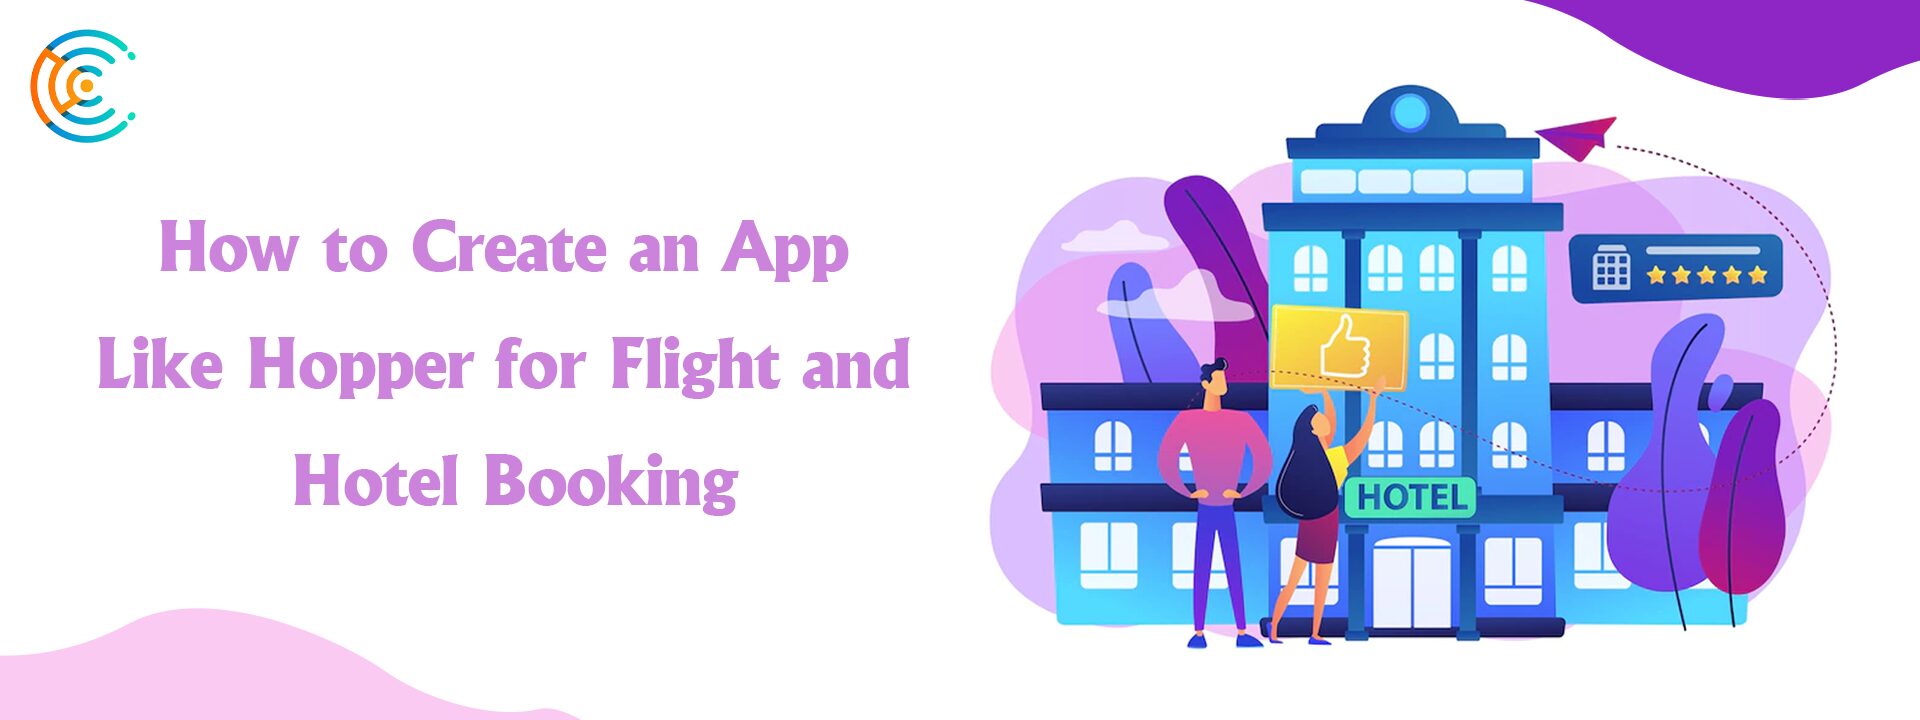 App Like Hopper for Flight and Hotel Booking